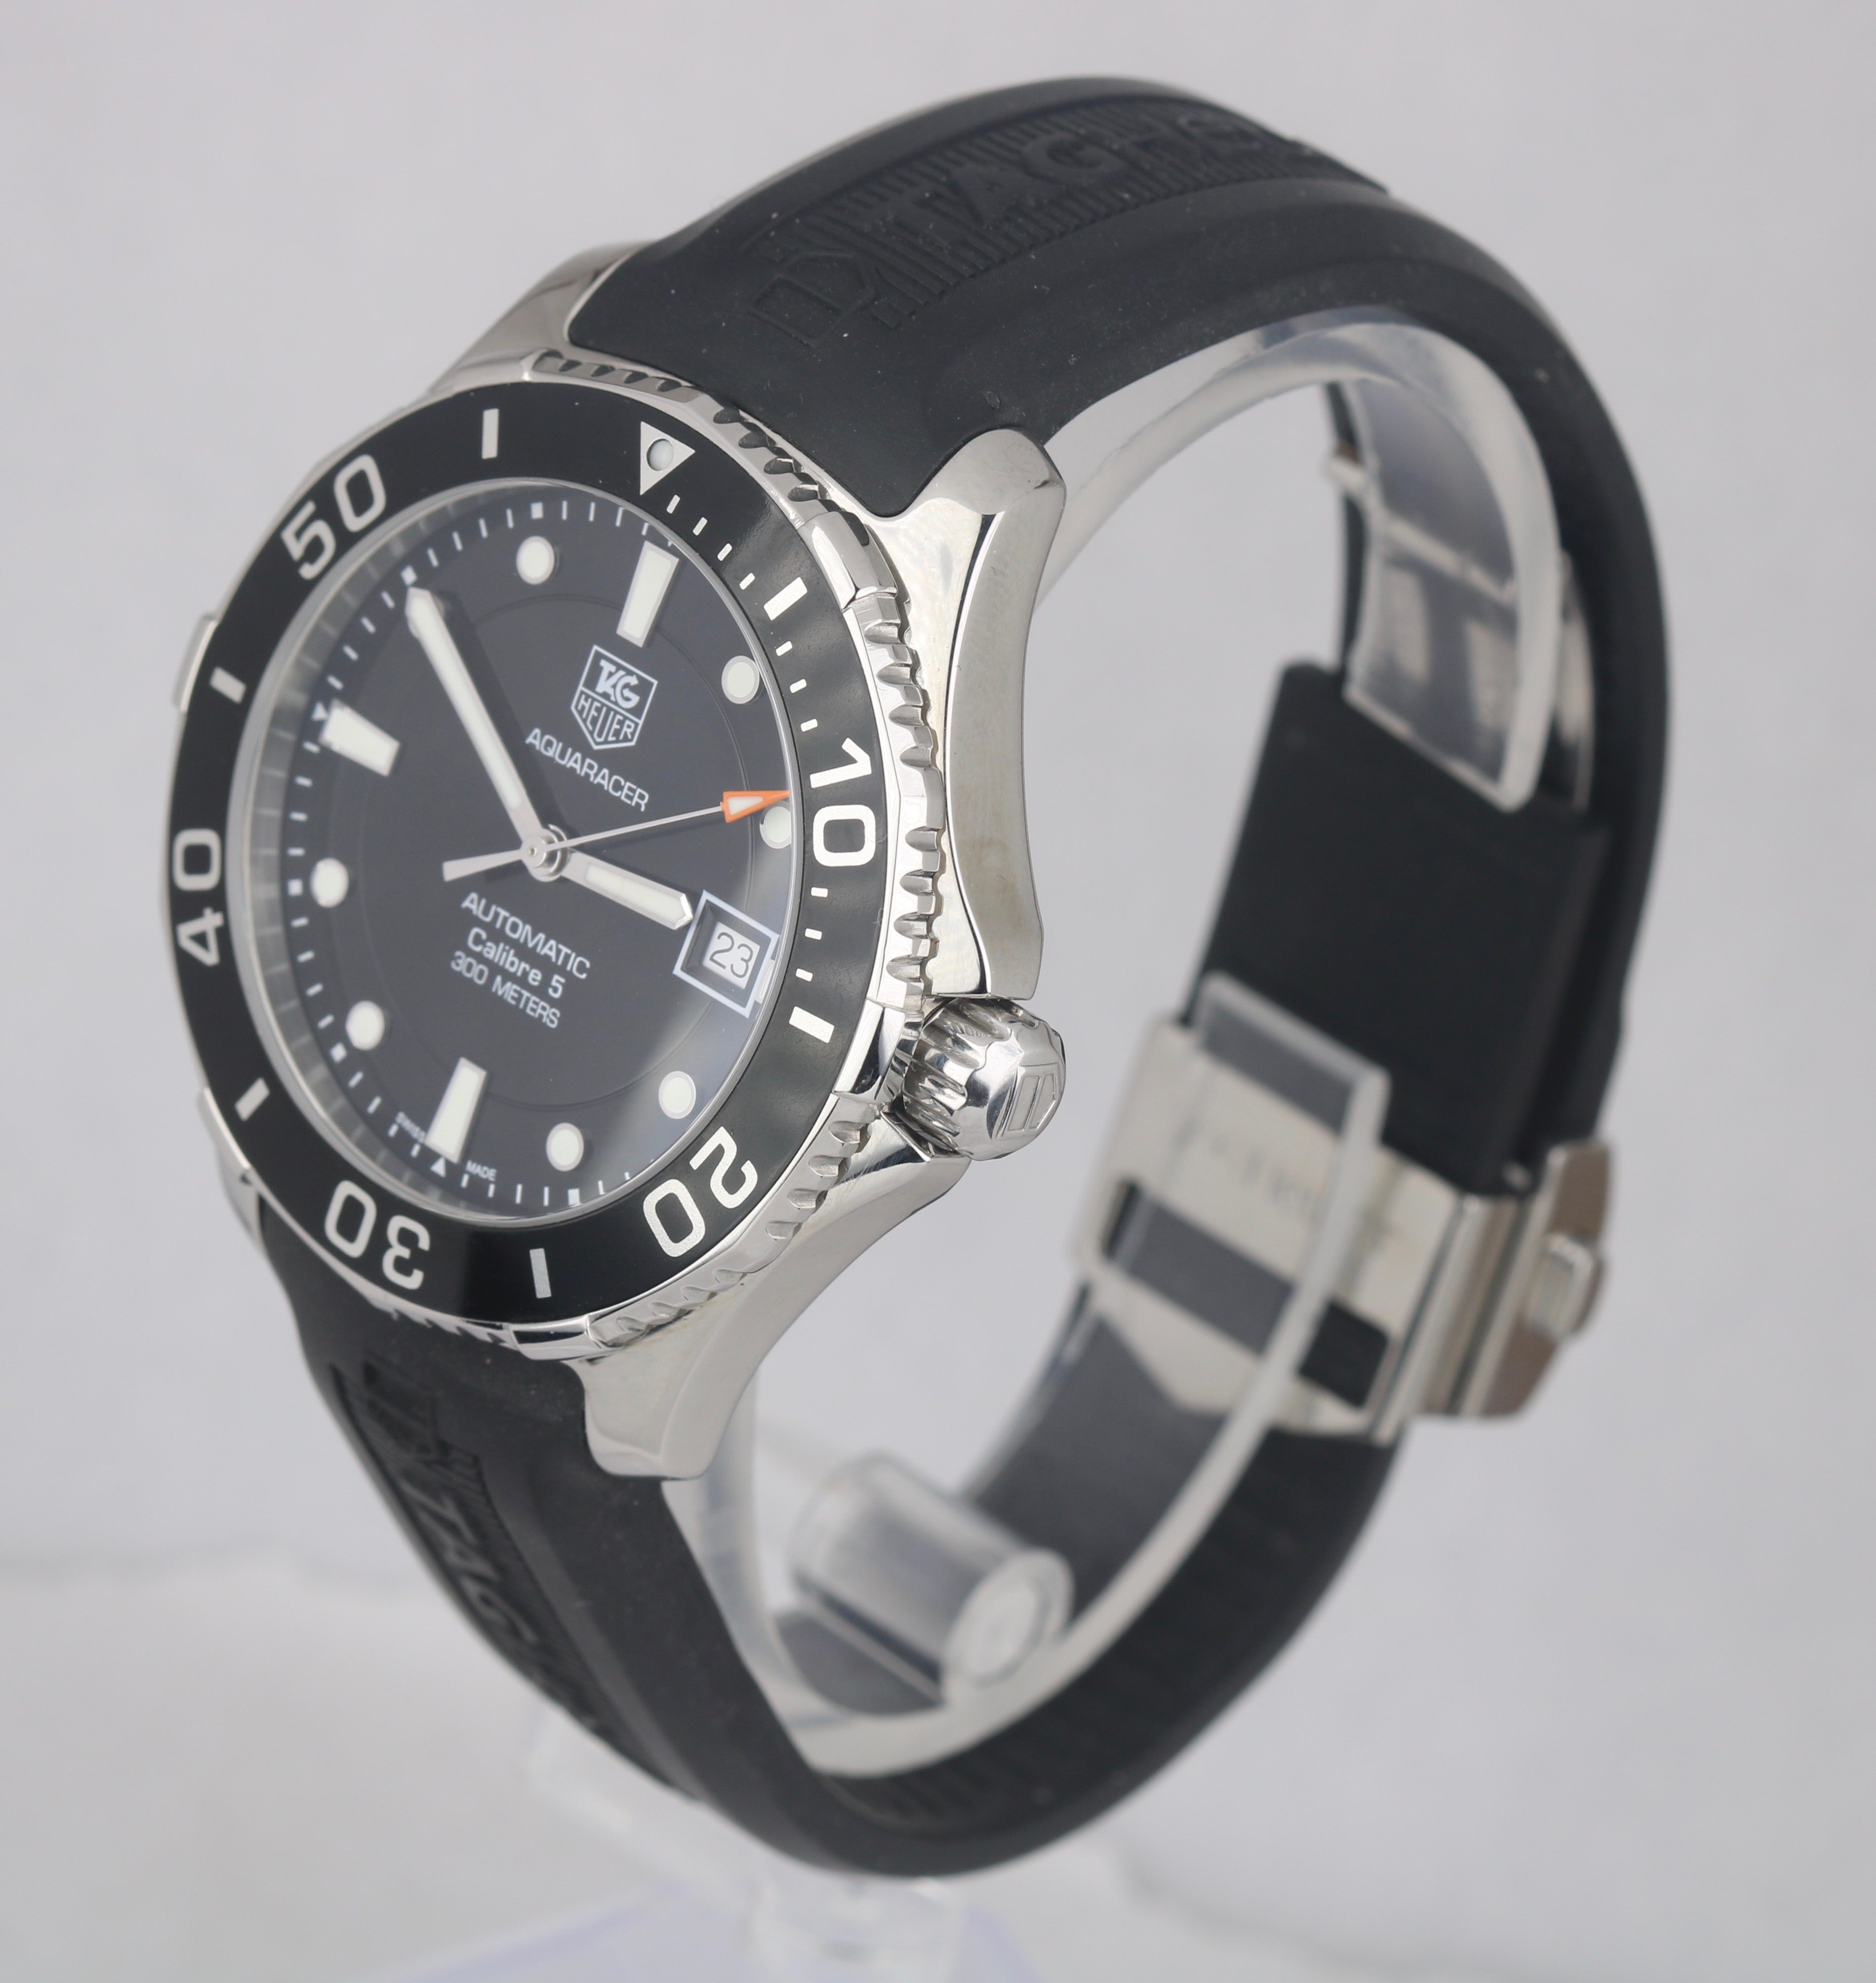 tag heuer calibre 5 automatic watch 41mm